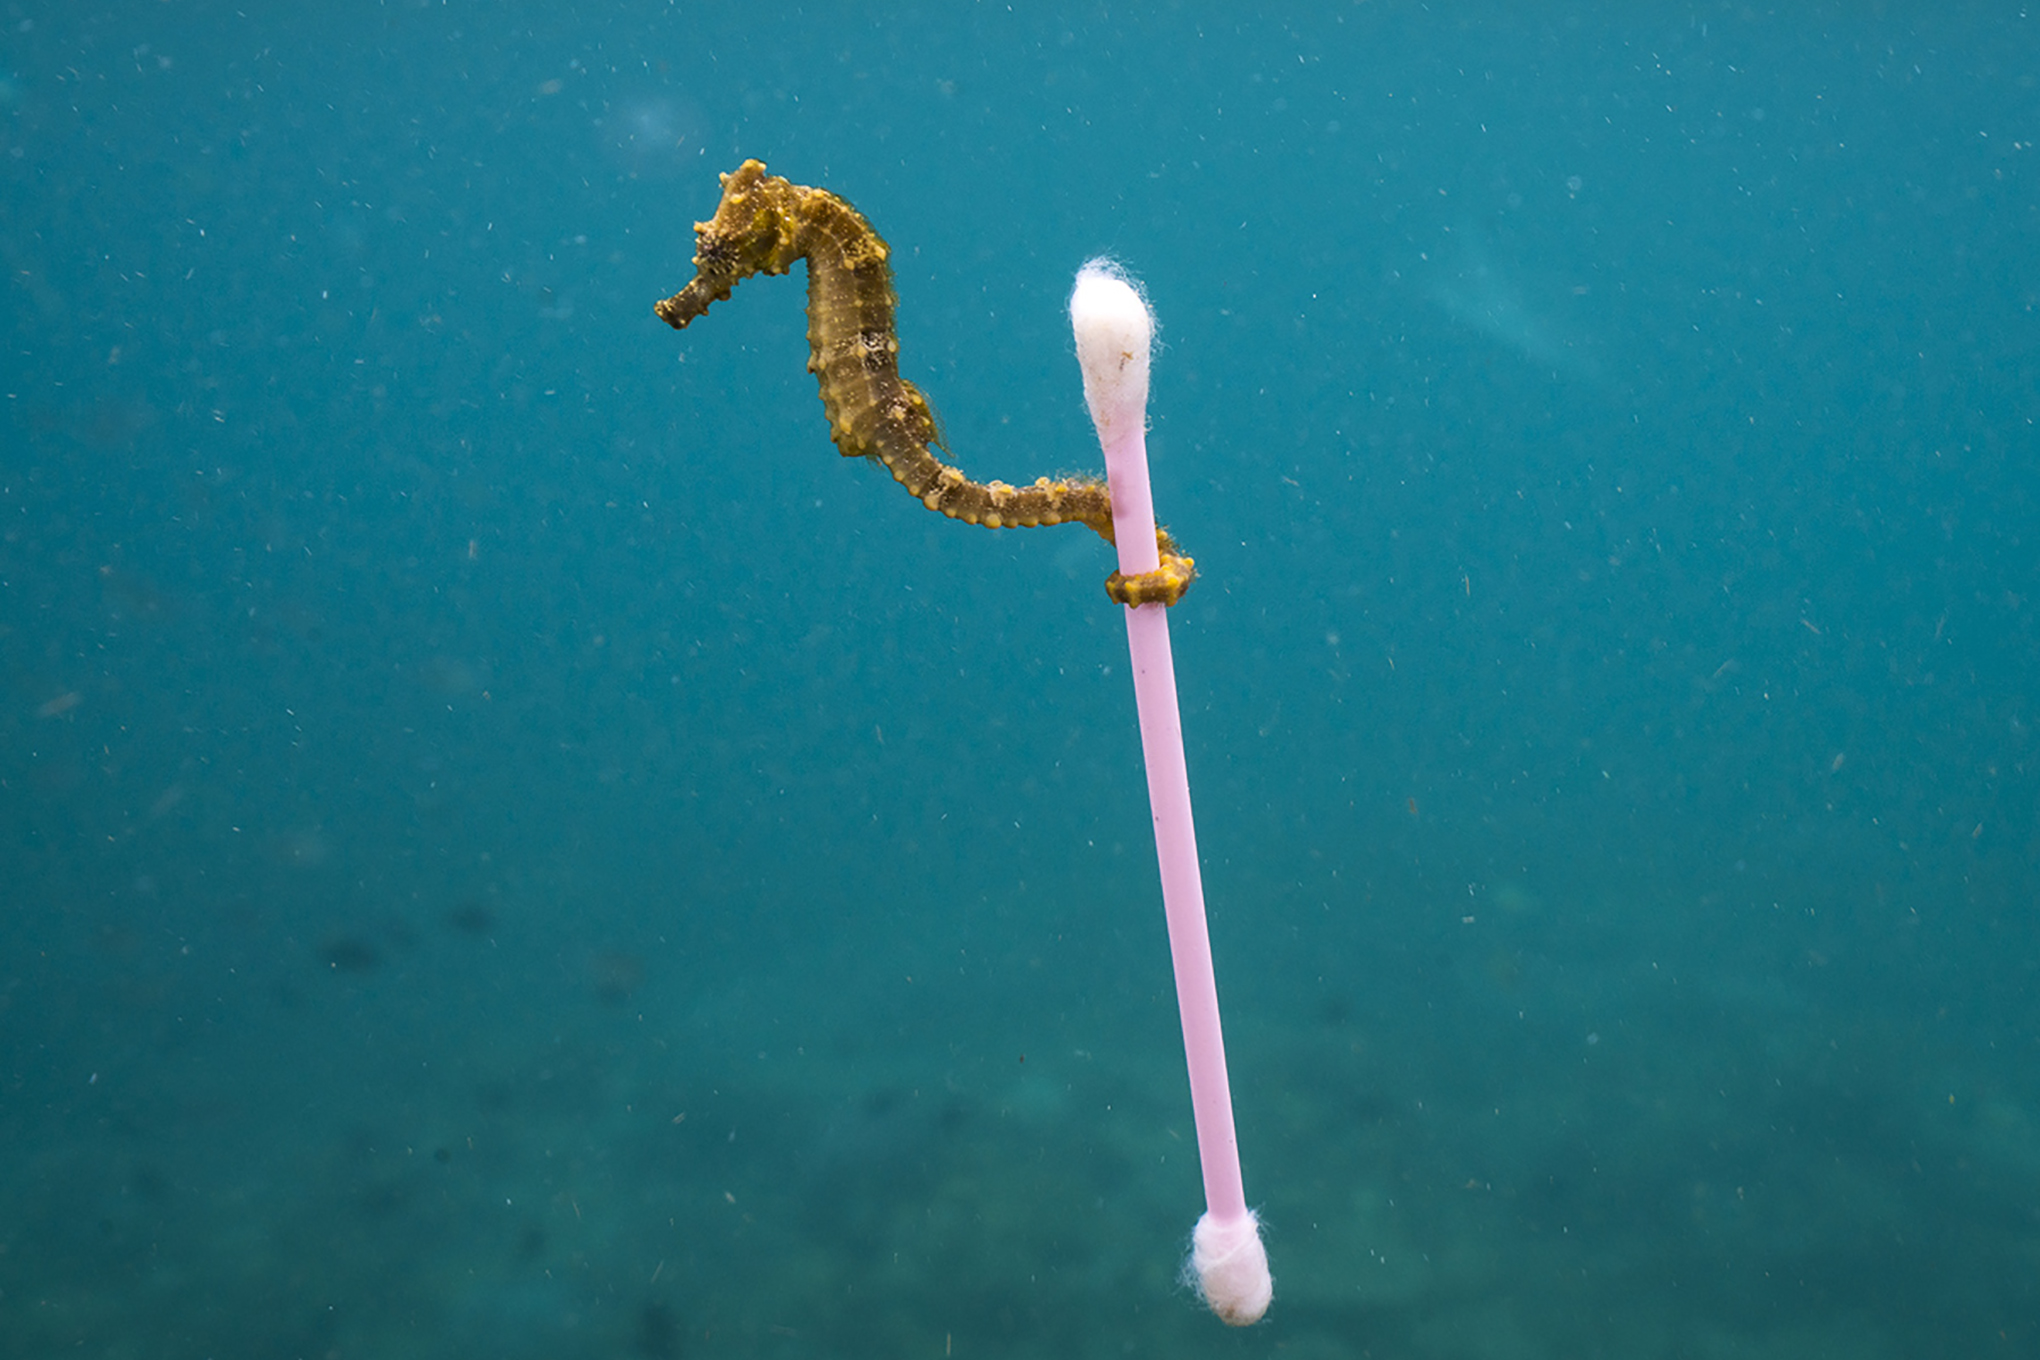 This is the story behind that tragic, viral photo of a seahorse ...